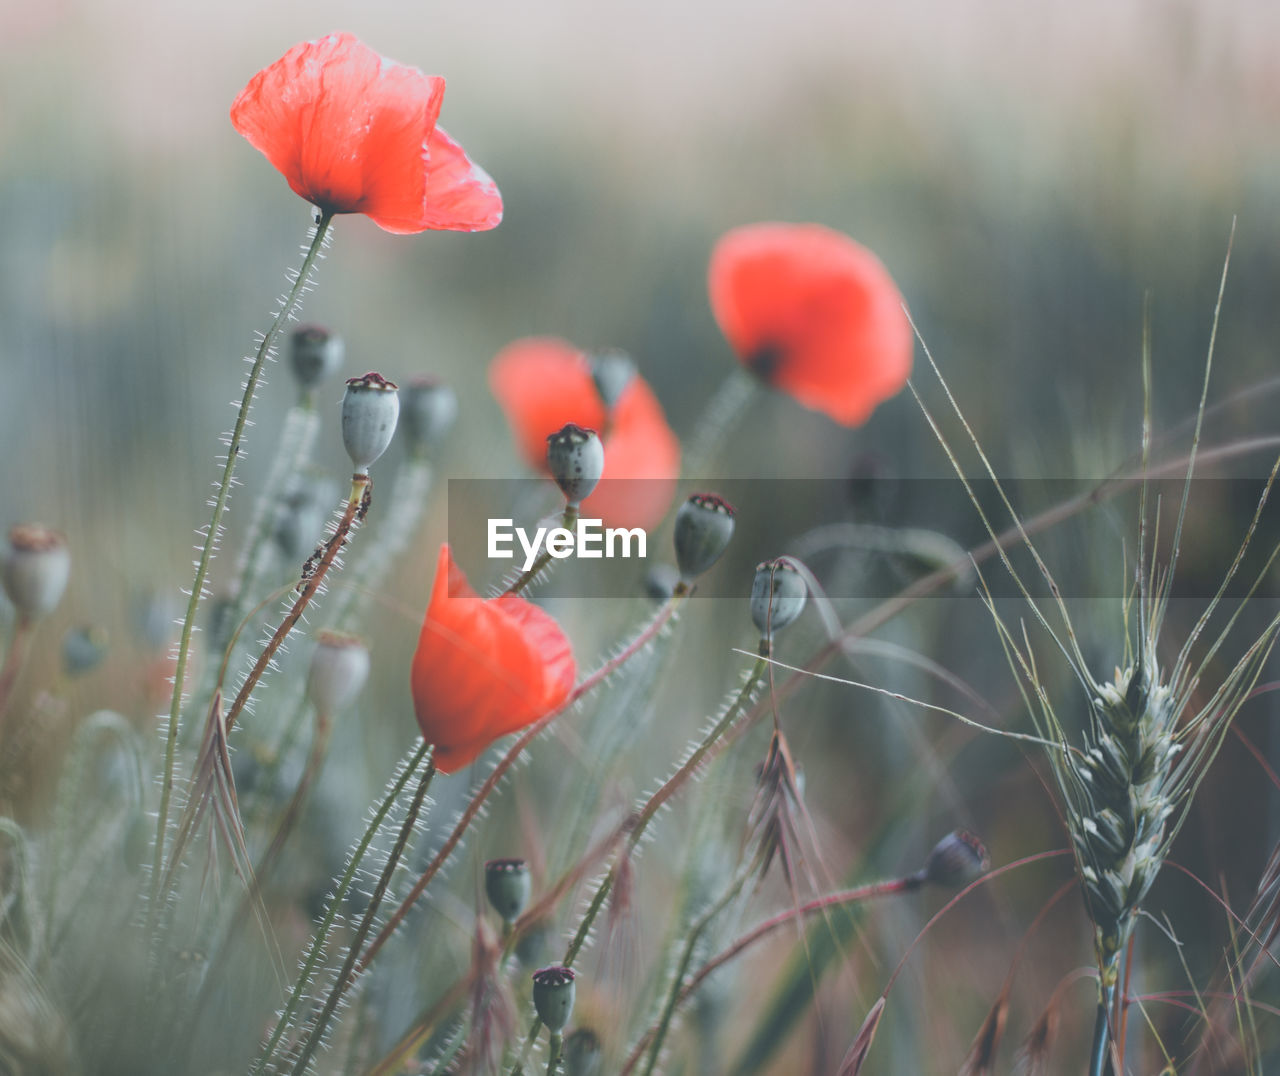 Close-up of red poppies growing on field